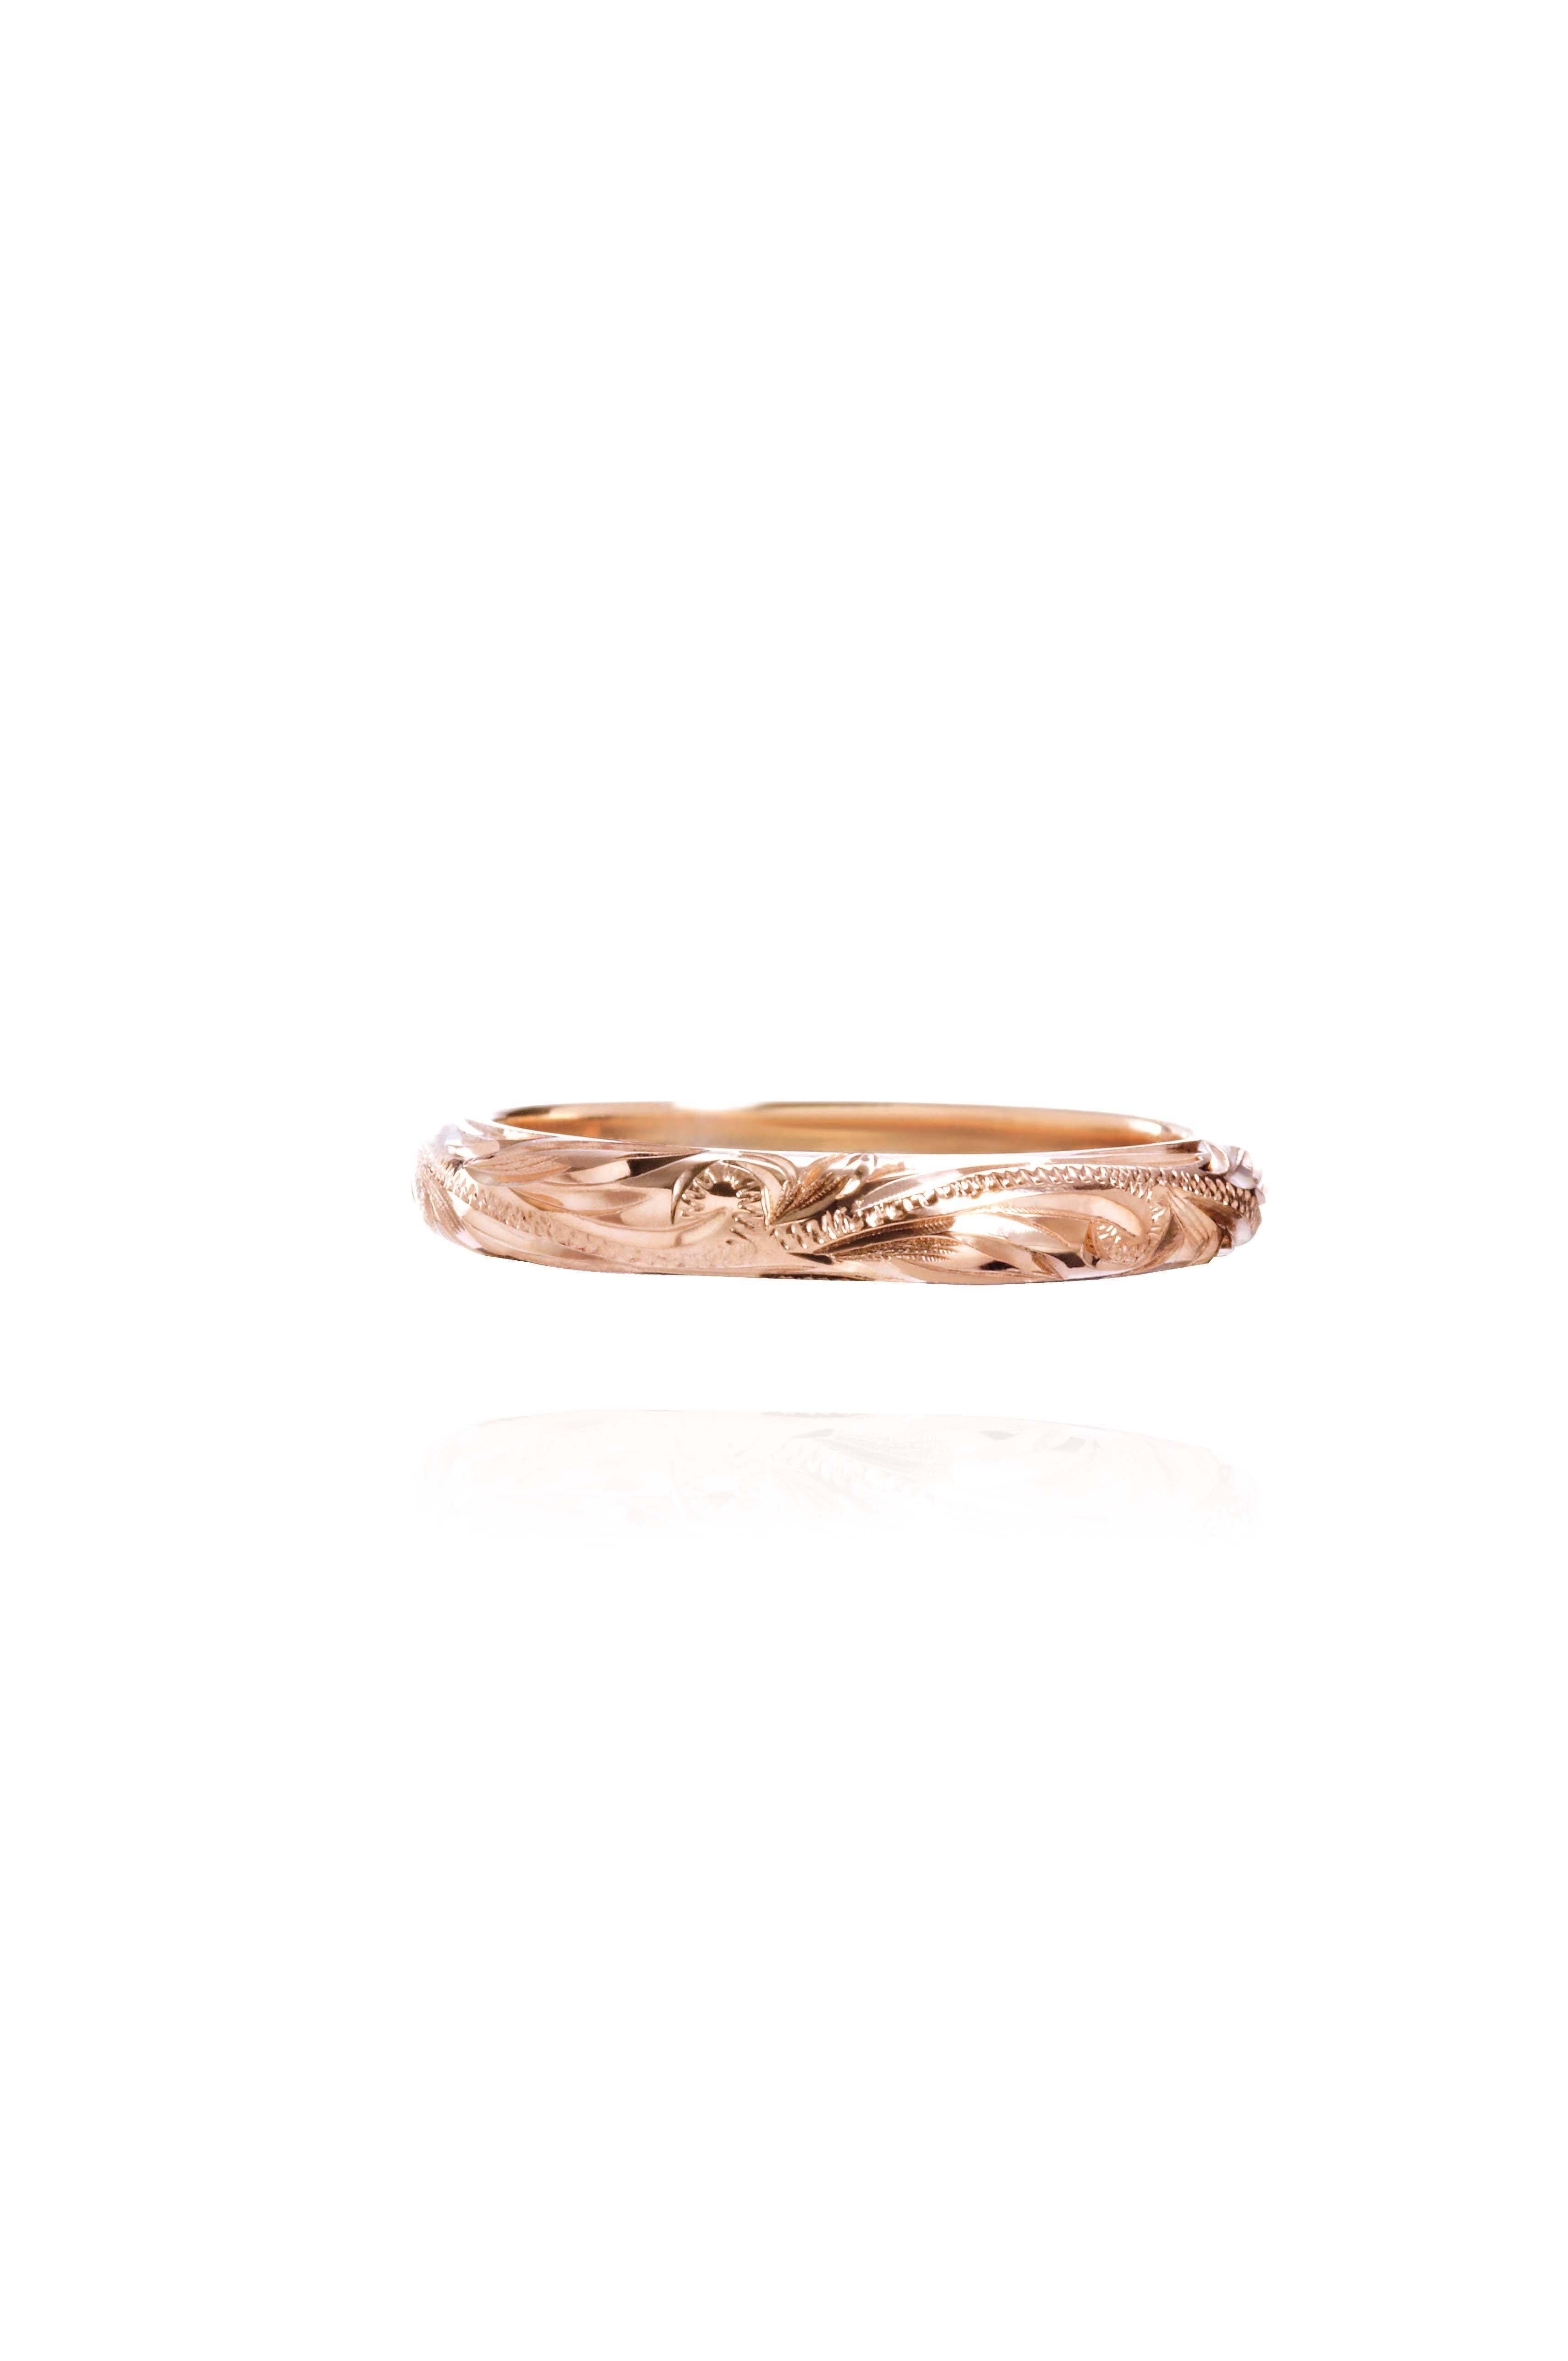 The picture shows a 14K rose gold infinity ring with hand-engraved detailing.